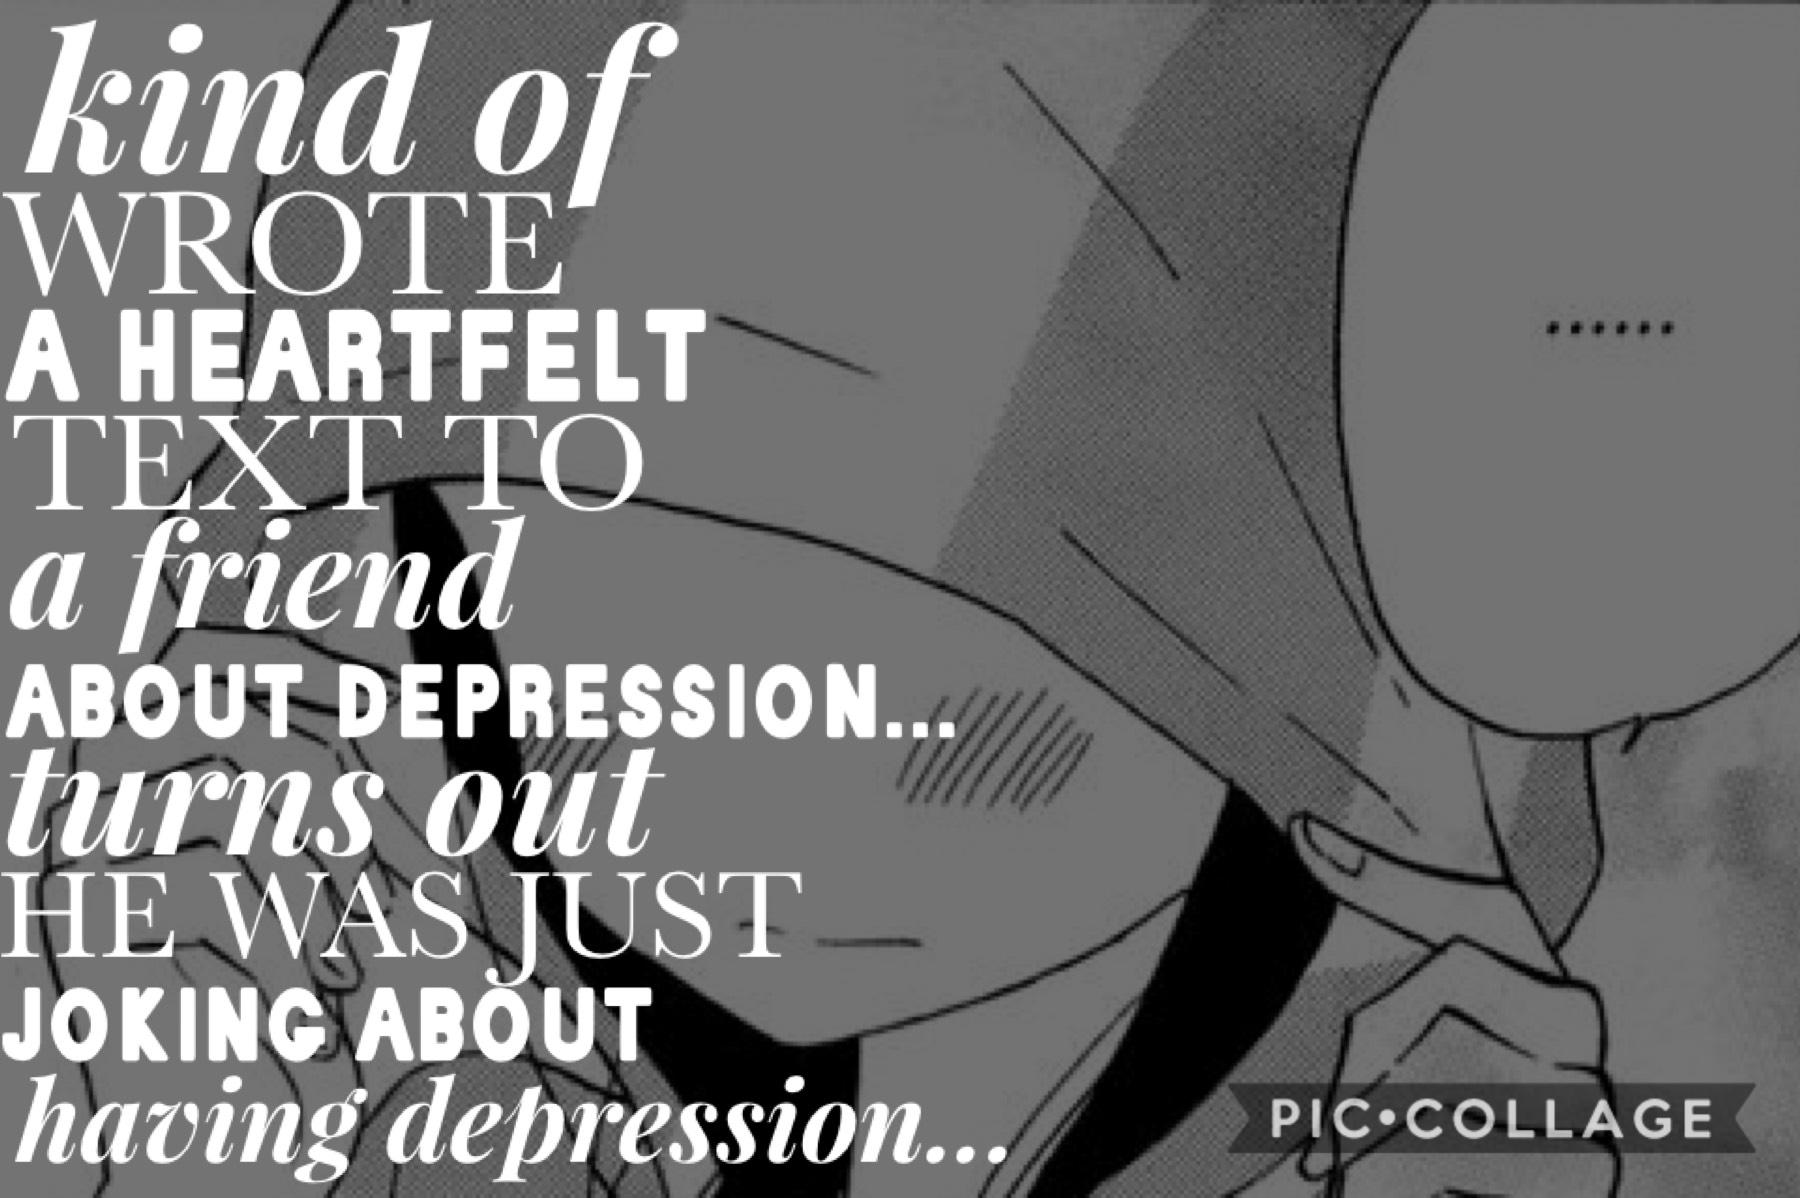 I’m not quite sure how to feel about that... FIRST DONT JOKE AROUND ABOUT HAVING DEPRESSION and I feel so embarrassed.... 